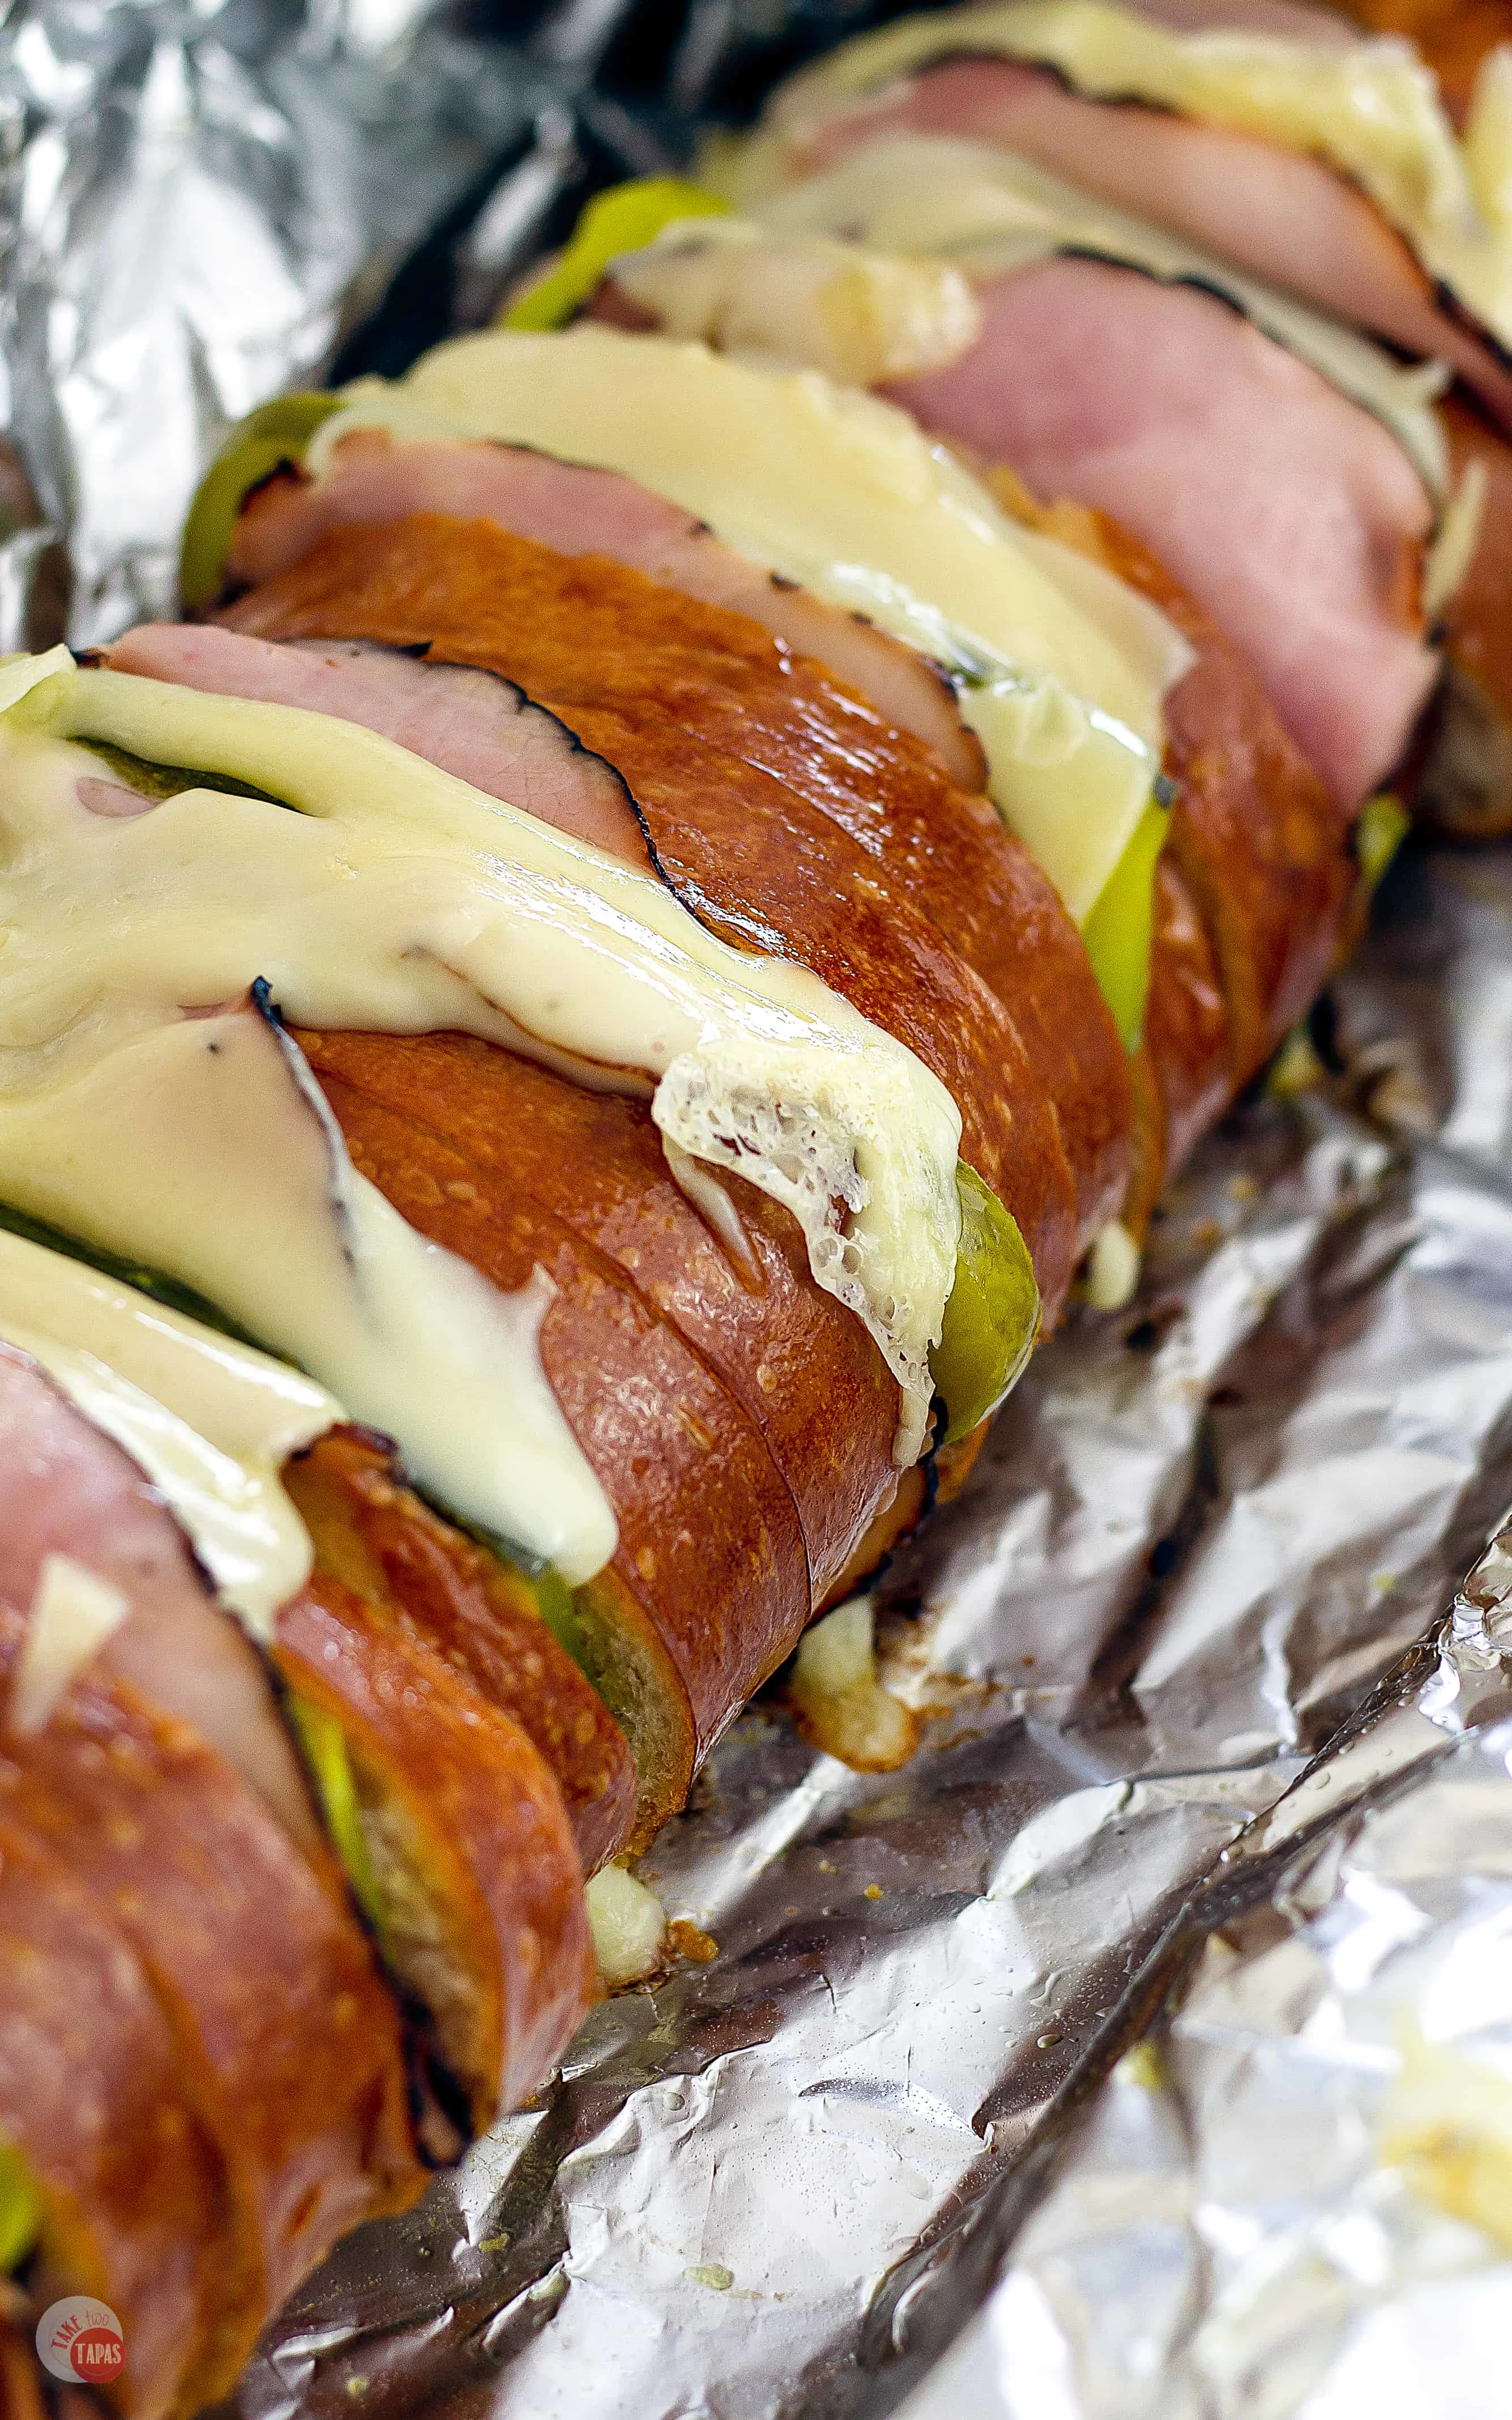 Make Ahead Cuban Sandwich Loaf for a Crowd - Tailgating Sandwiches | Take Two Tapas | #TailgatingSandwiches #GrillRecipes #LargeSandwiches #CubanSandwich #CubanSandwichLoaf #GrillSandwiches #MakeAheadTailgateRecipes